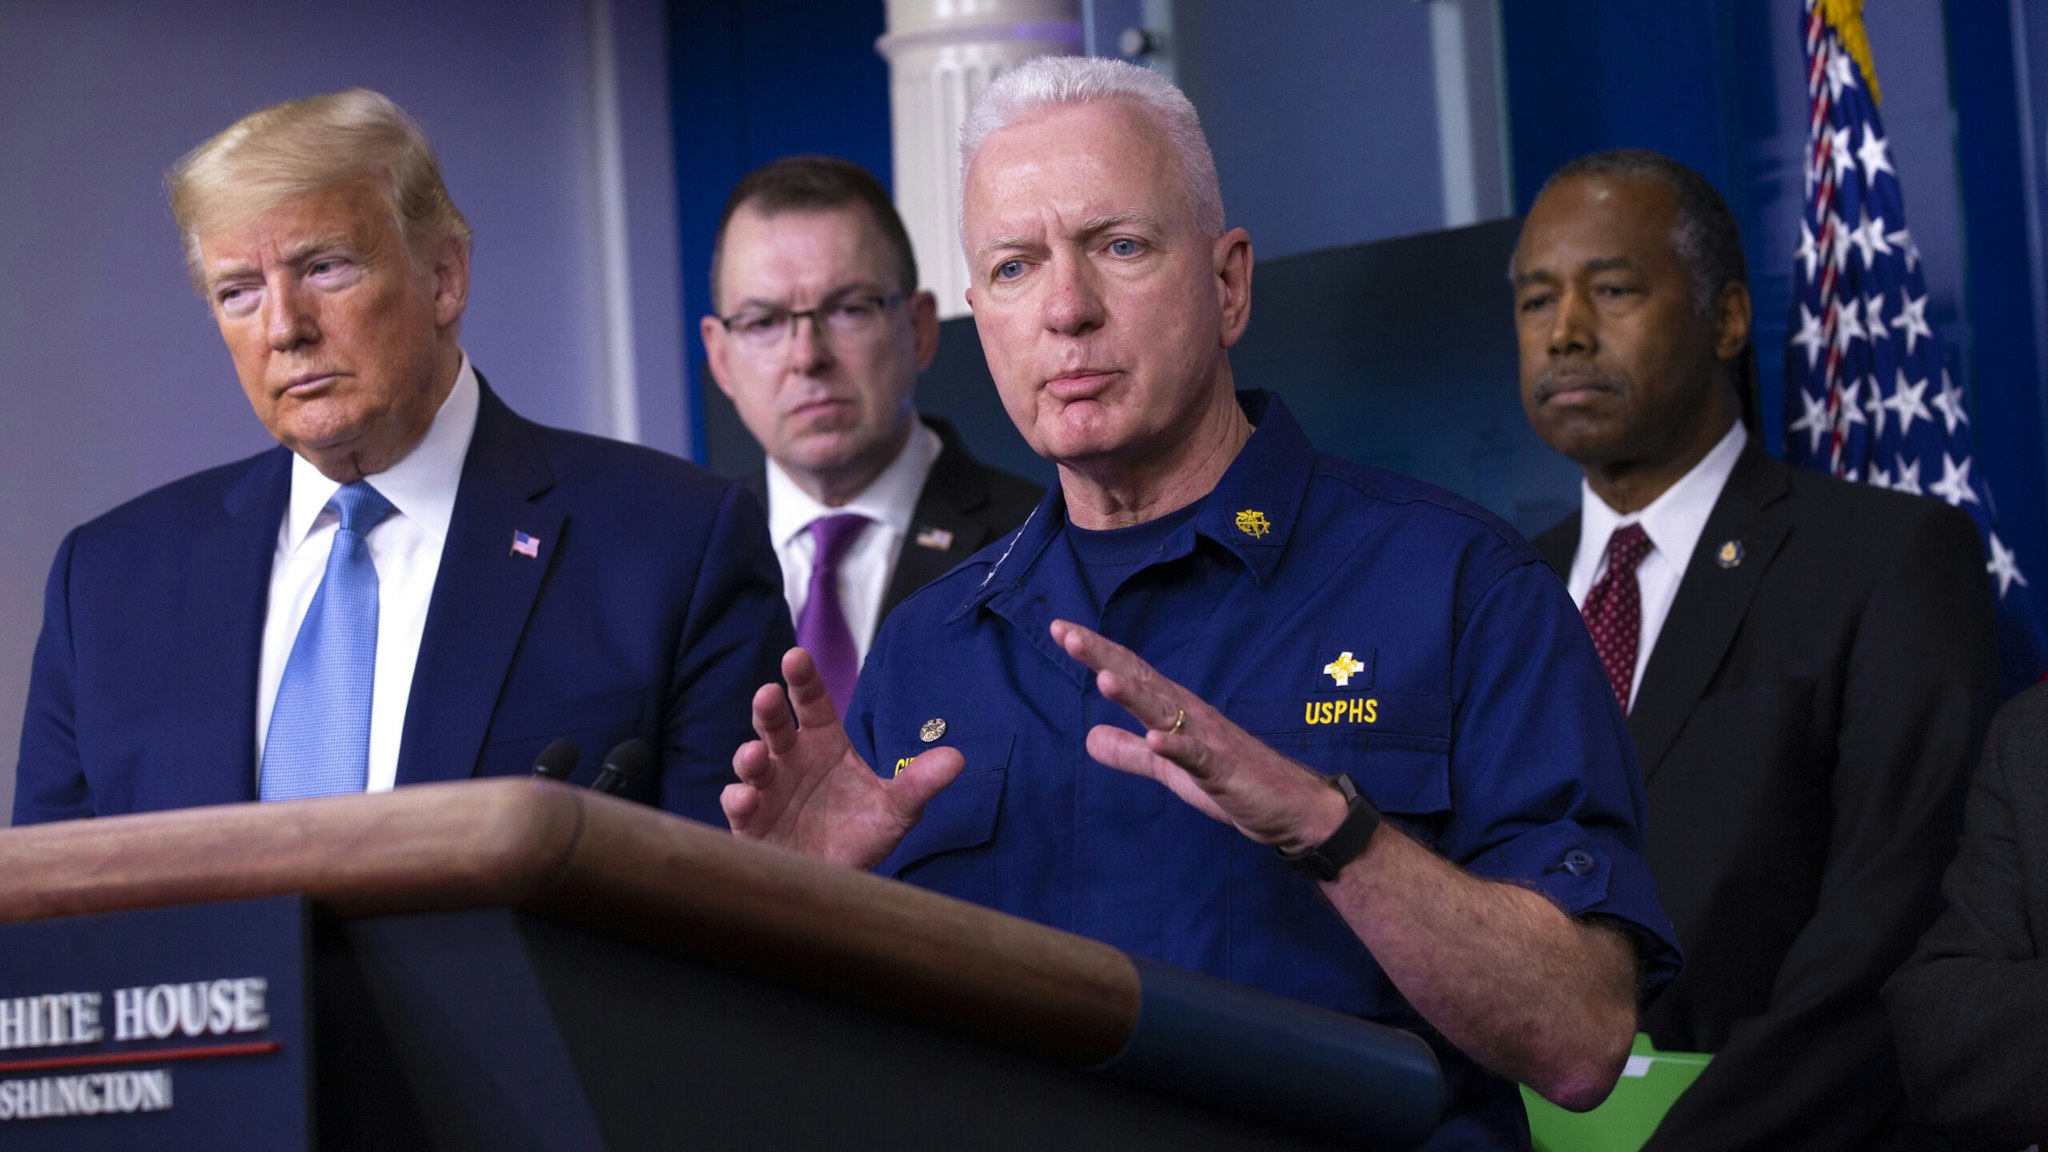 Brett Giroir, U.S. assistant secretary for health, center, speaks during a Coronavirus Task Force news conference in the briefing room of the White House in Washington, D.C., U.S., on Saturday, March 21, 2020. President Donald Trump said negotiators in Congress and his administration are "very close" to agreement on a coronavirus economic-relief plan that his economic adviser said will aim to boost the U.S. economy by about $2 trillion.